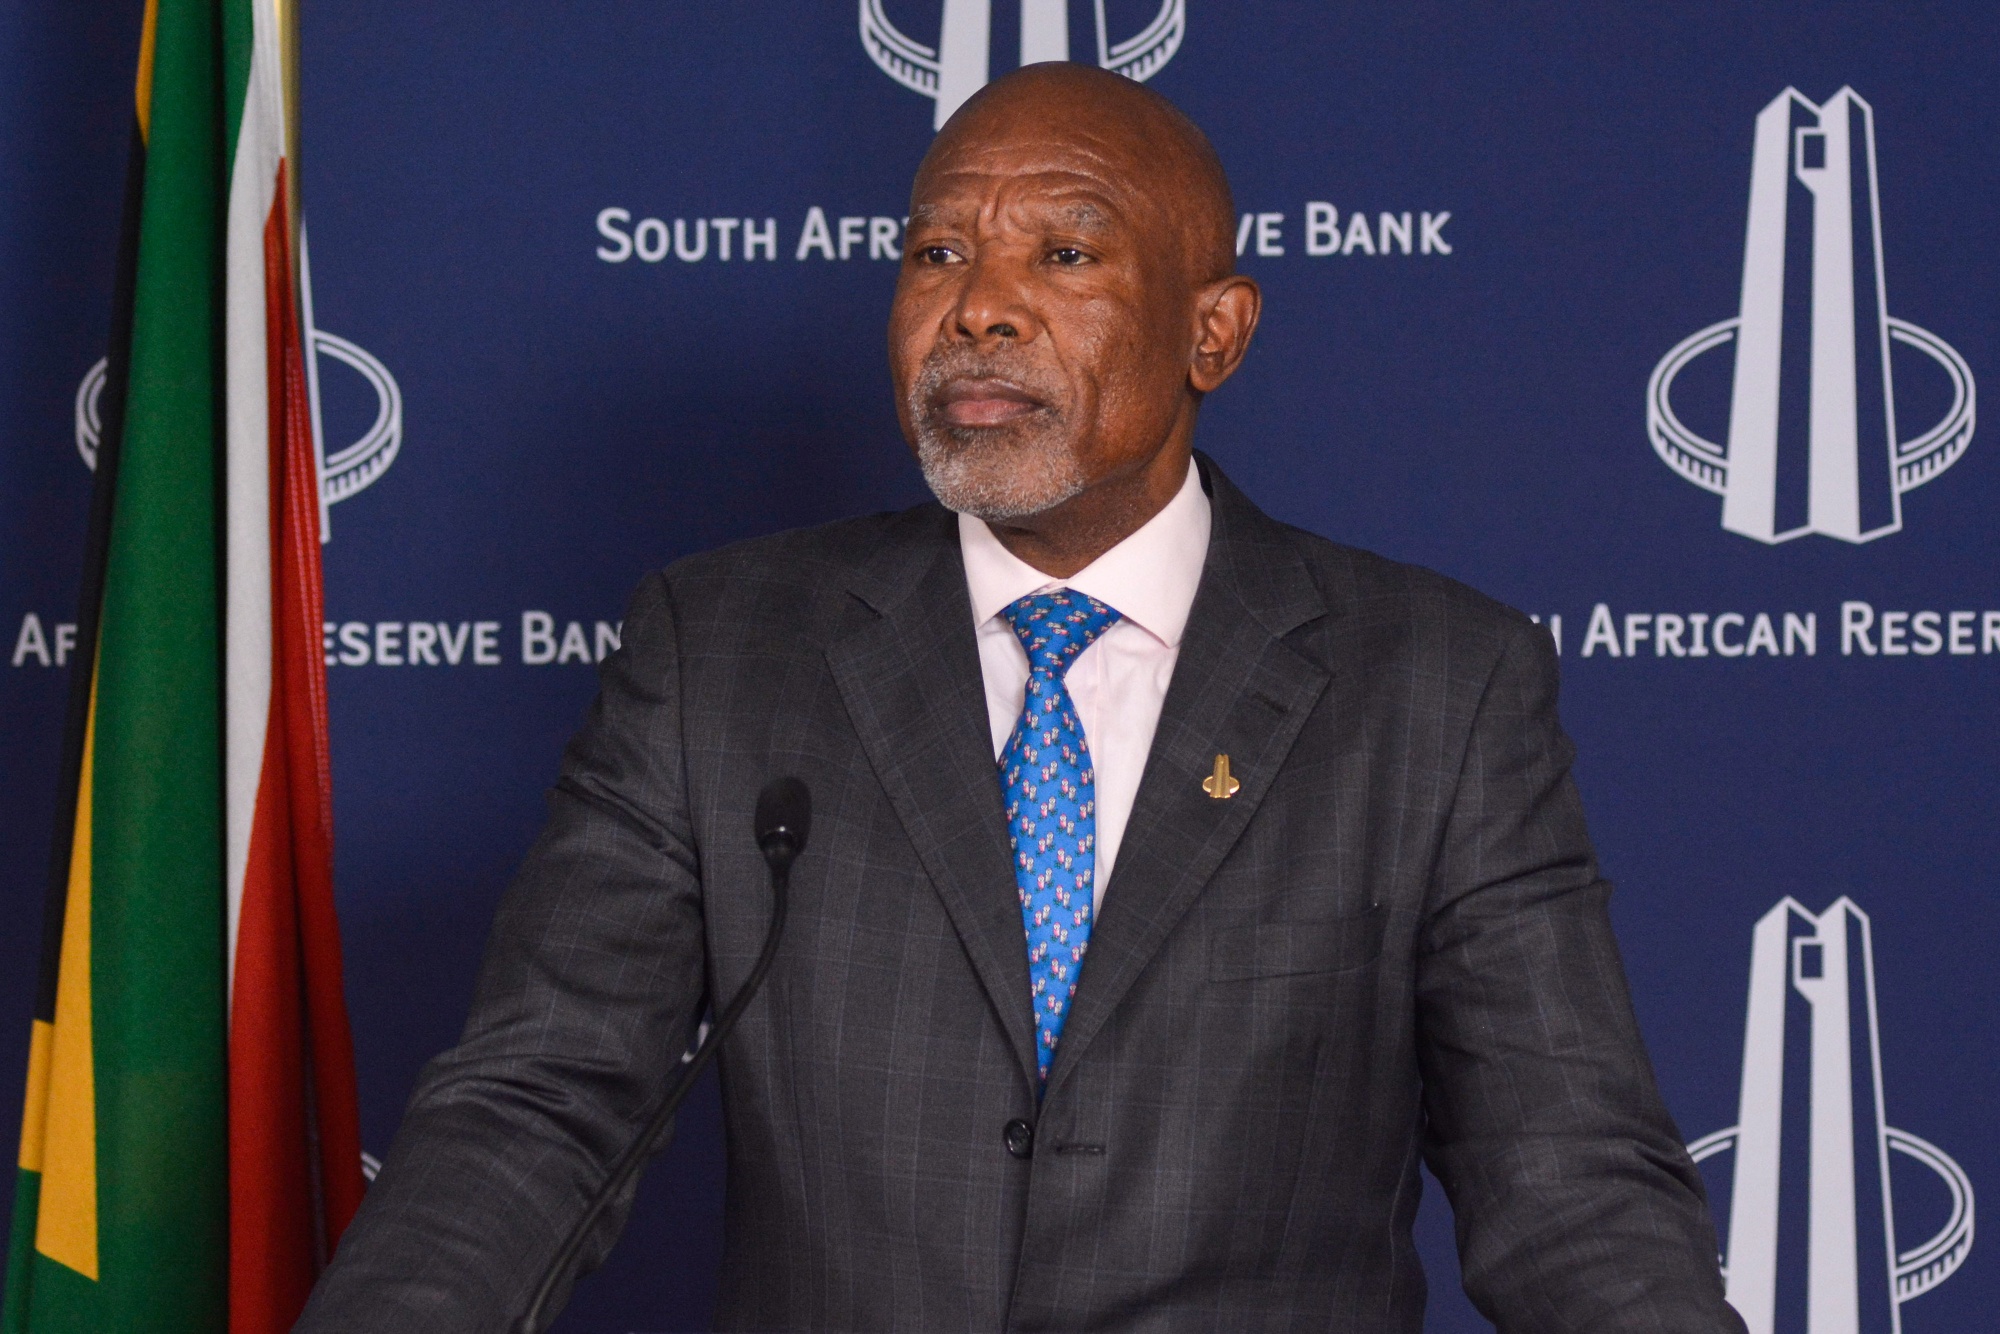 South Africa Rate Hikes Needed to Tame Inflation, Kganyago Says Bloomberg